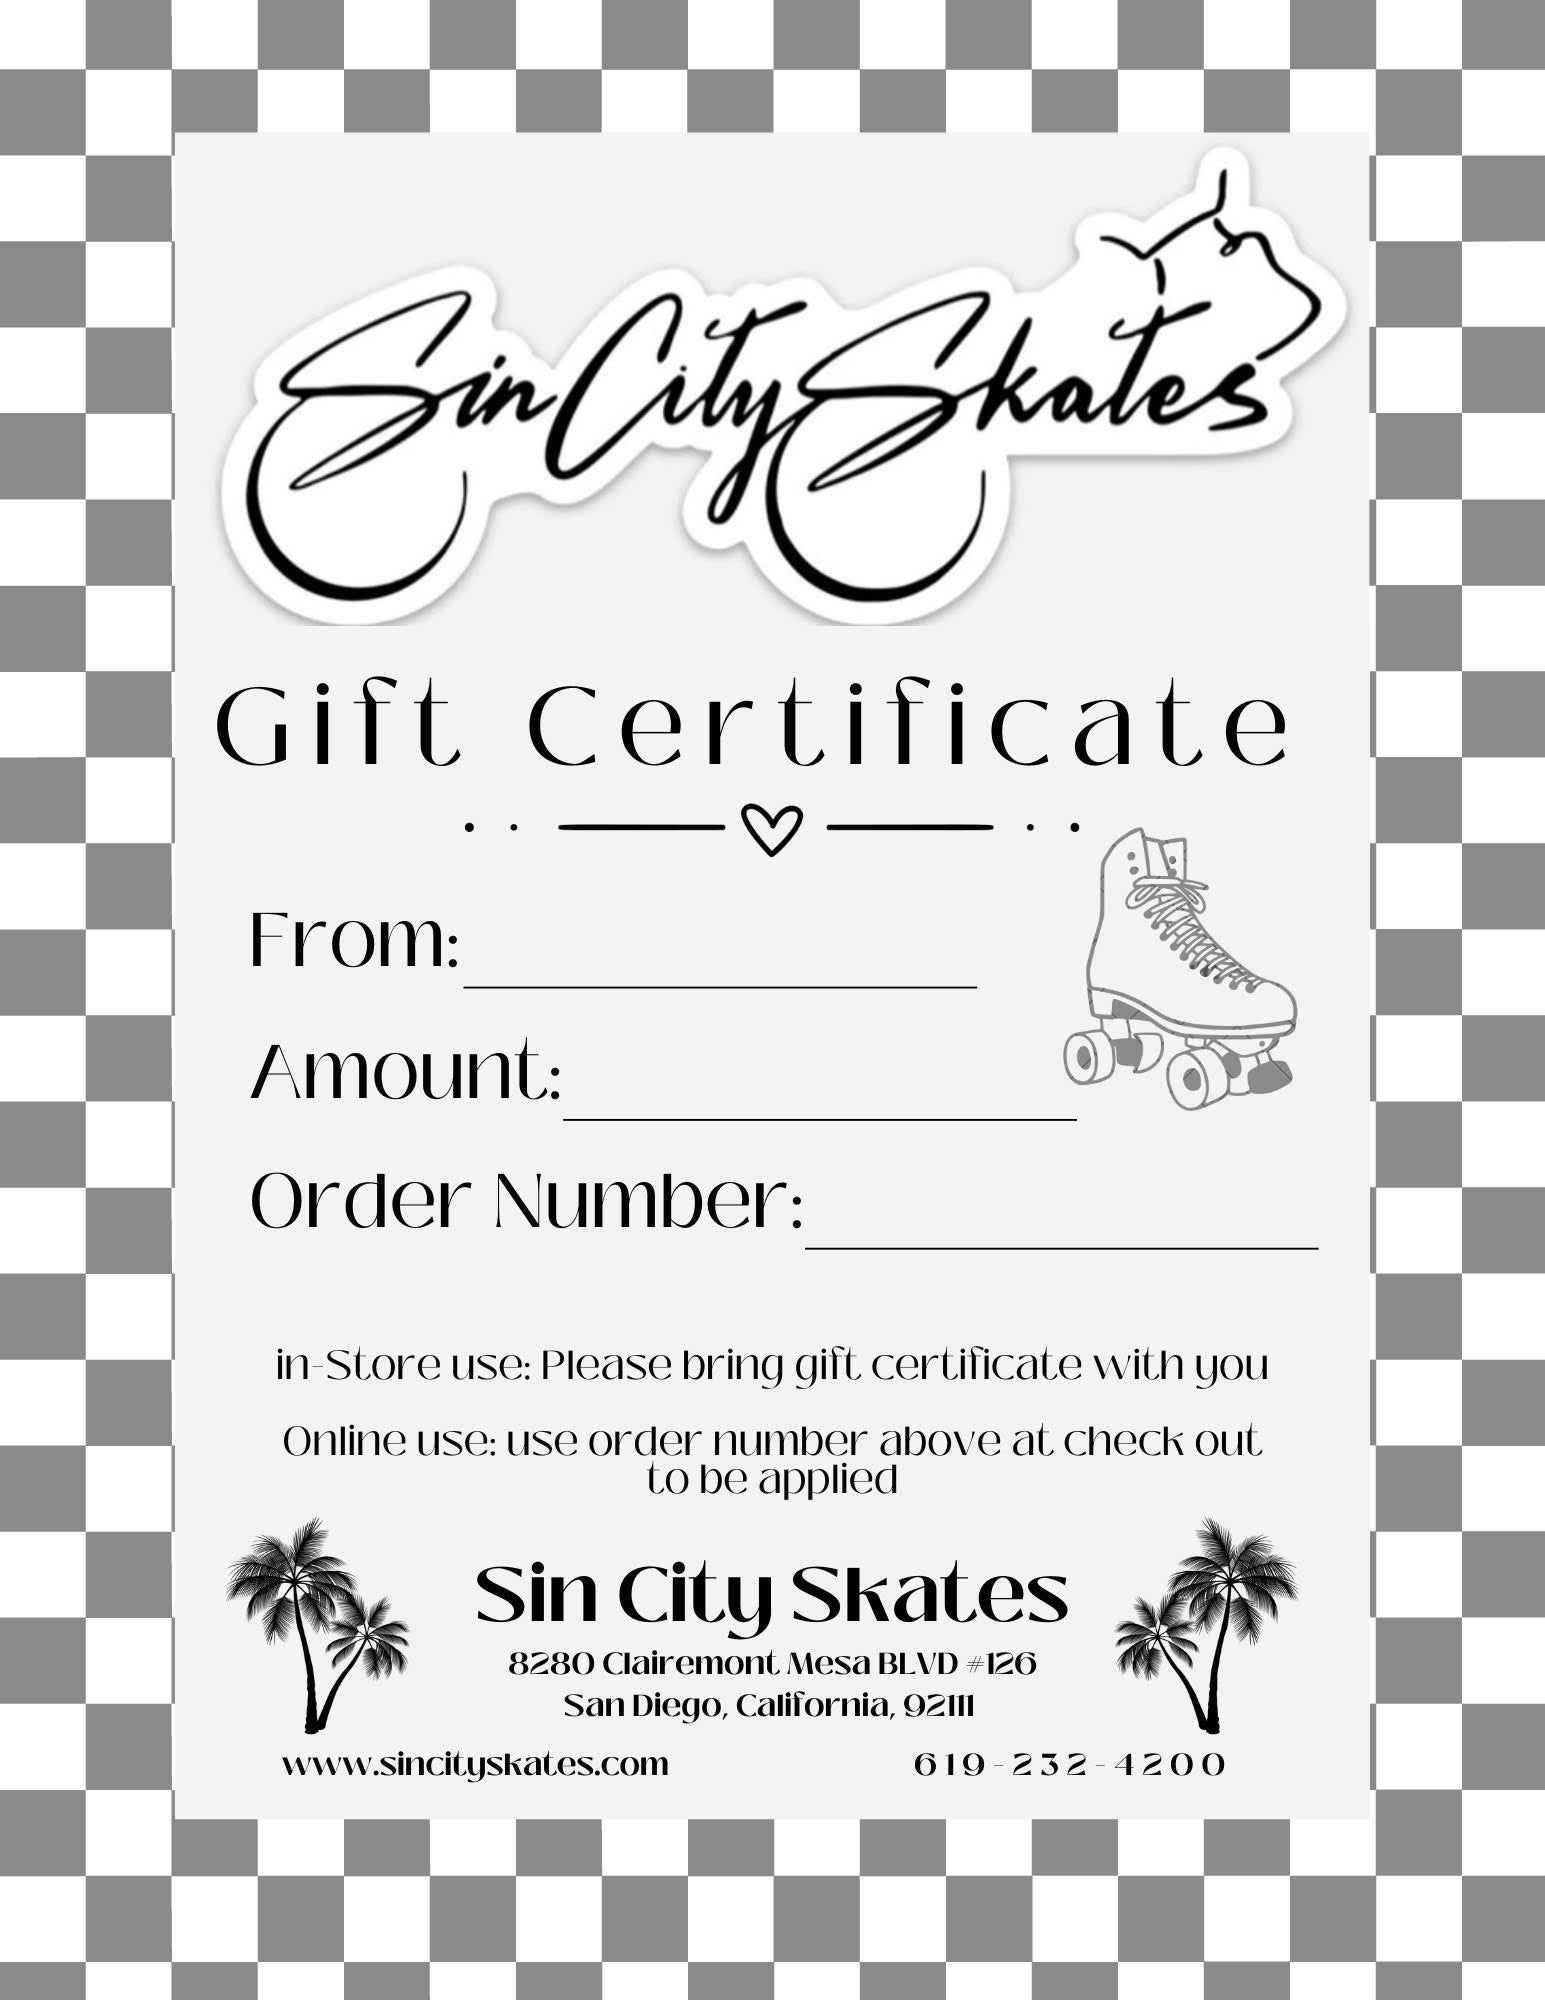 Gift Certificate -Print at home